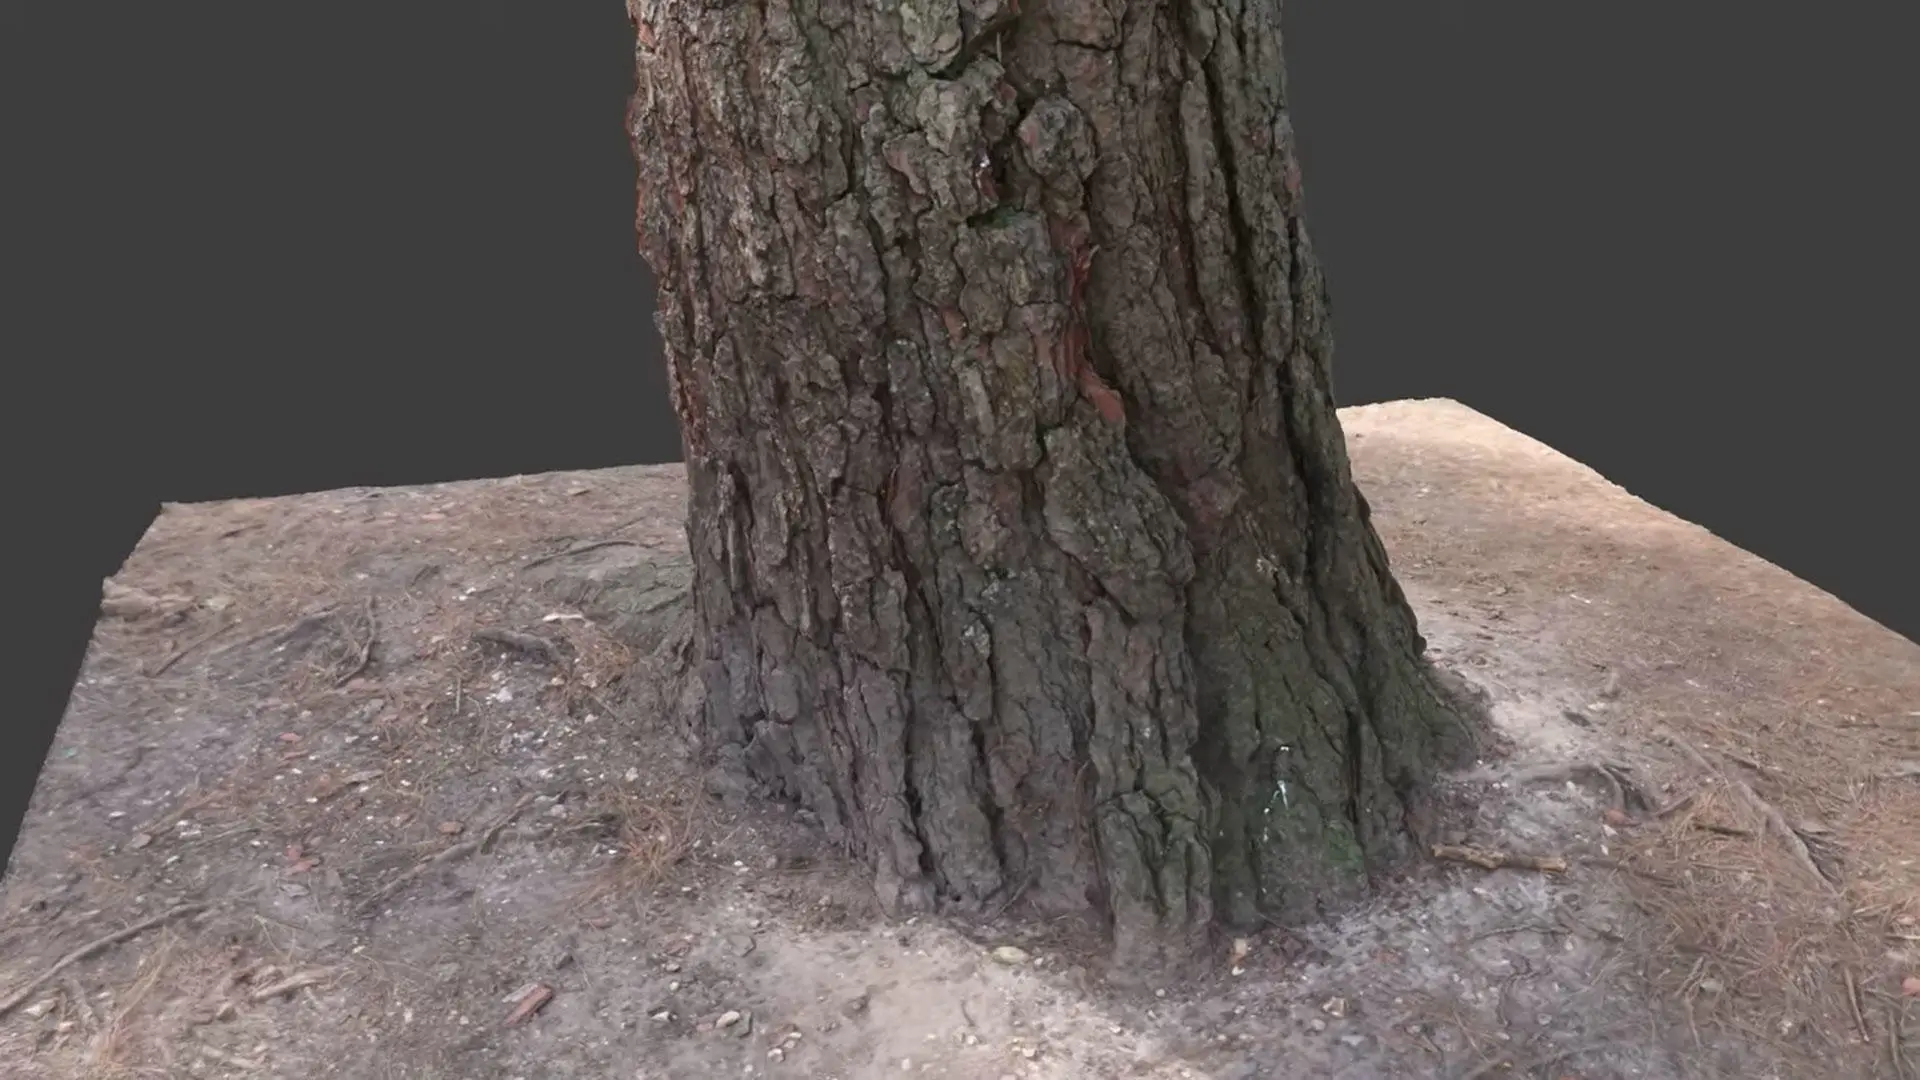 Screenshot of Ziyi Yang's work showing a computer-generated tree trunk in close-up